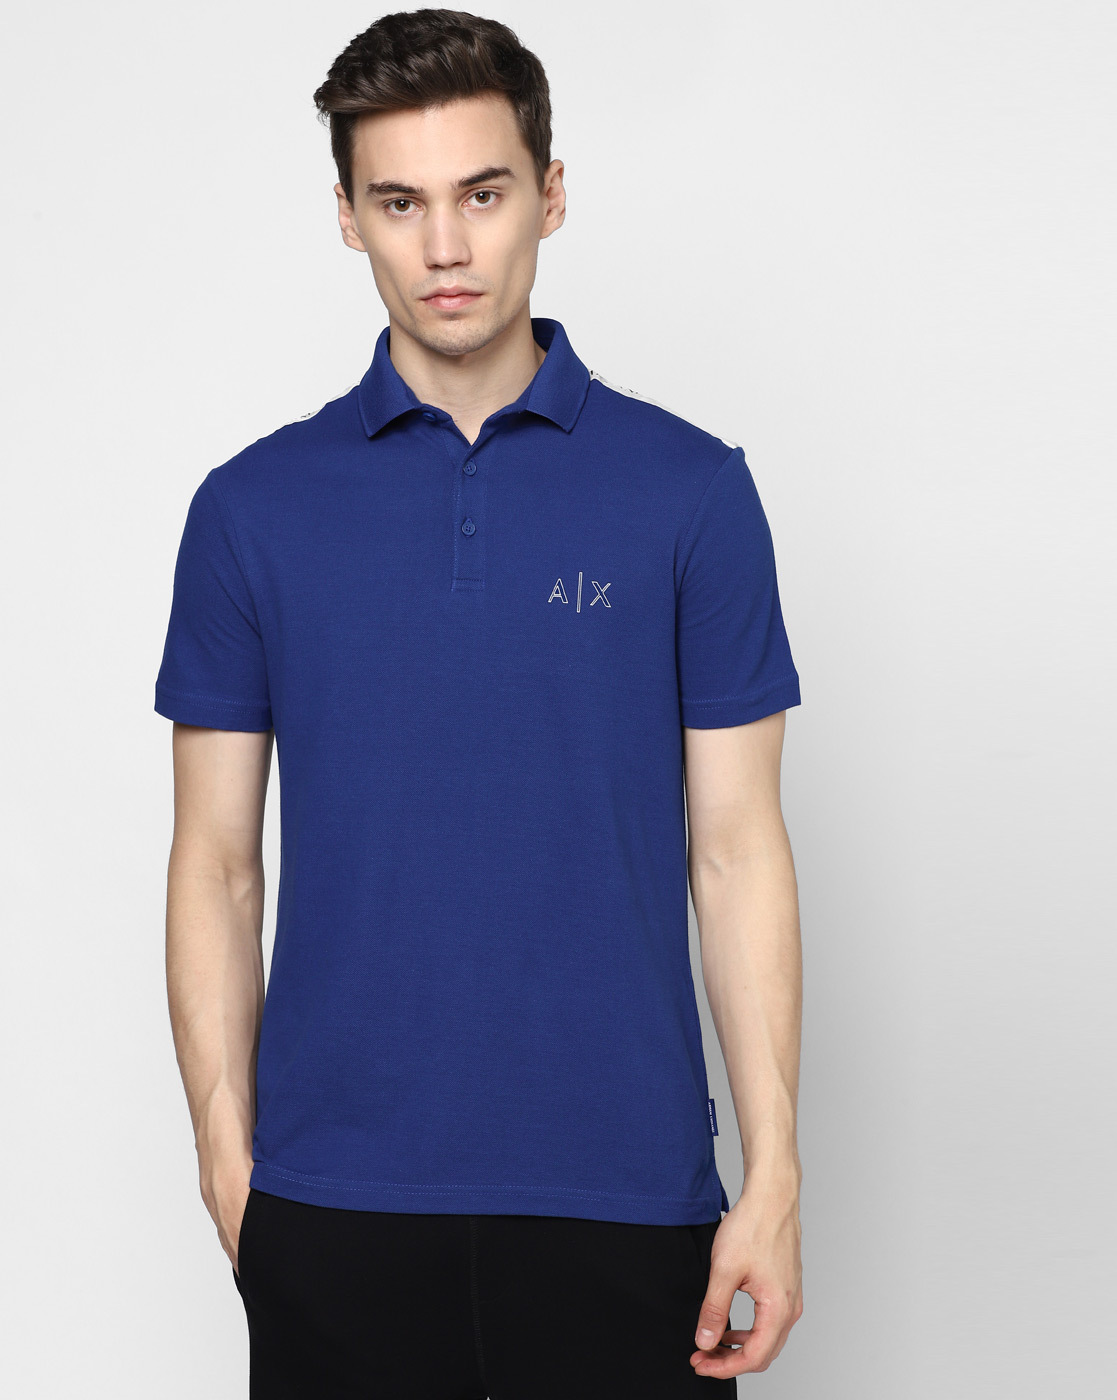 Armani Exchange Blue T Shirt Clearance Selling, Save 40% 